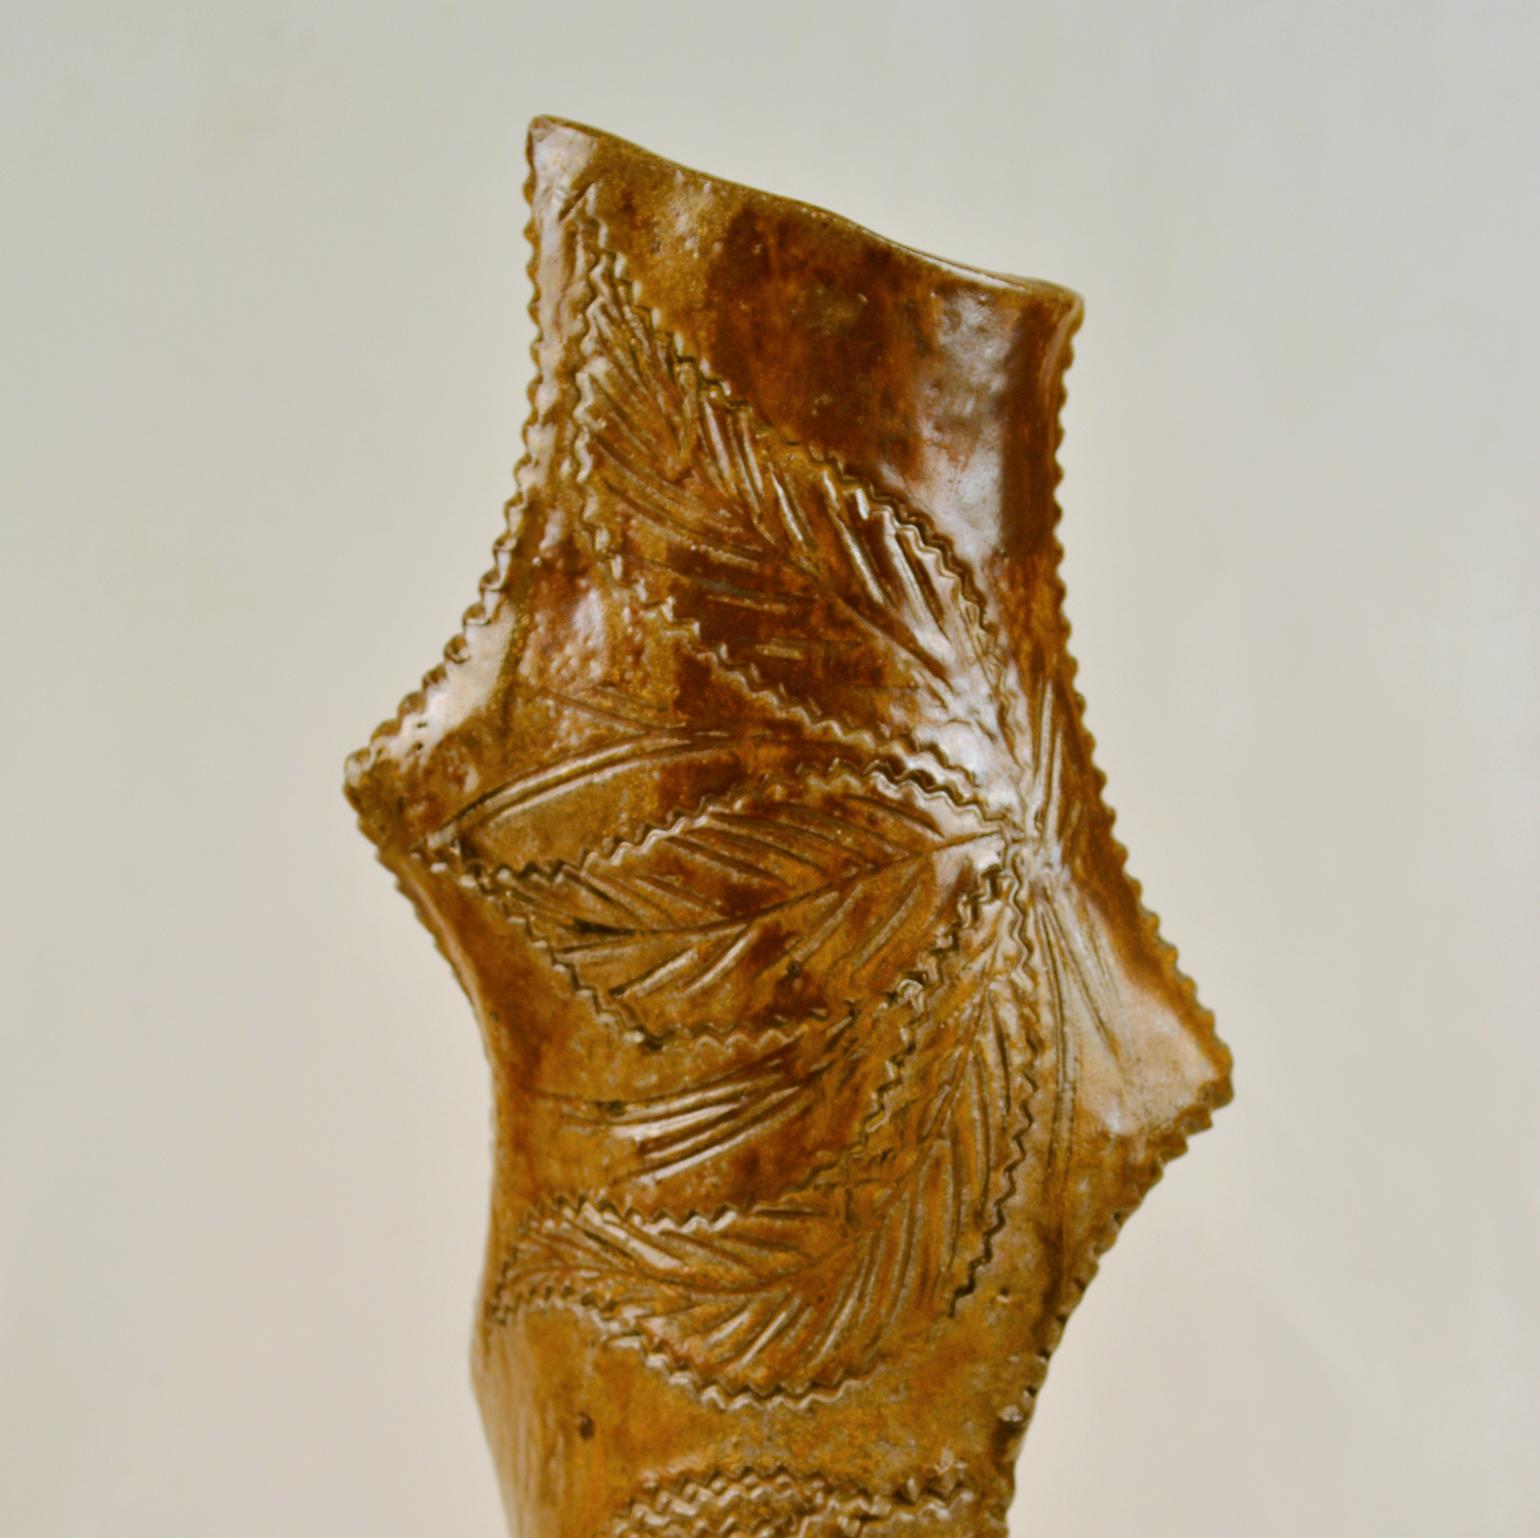 Tall sculptural studio pottery floor vase, sculpted and decorated in the manner of traditional Dutch Frisian Art Pottery. This 1970's decorative vase is glazed in mustard, brown with and the deep textured surface with intricate pattern comes alive